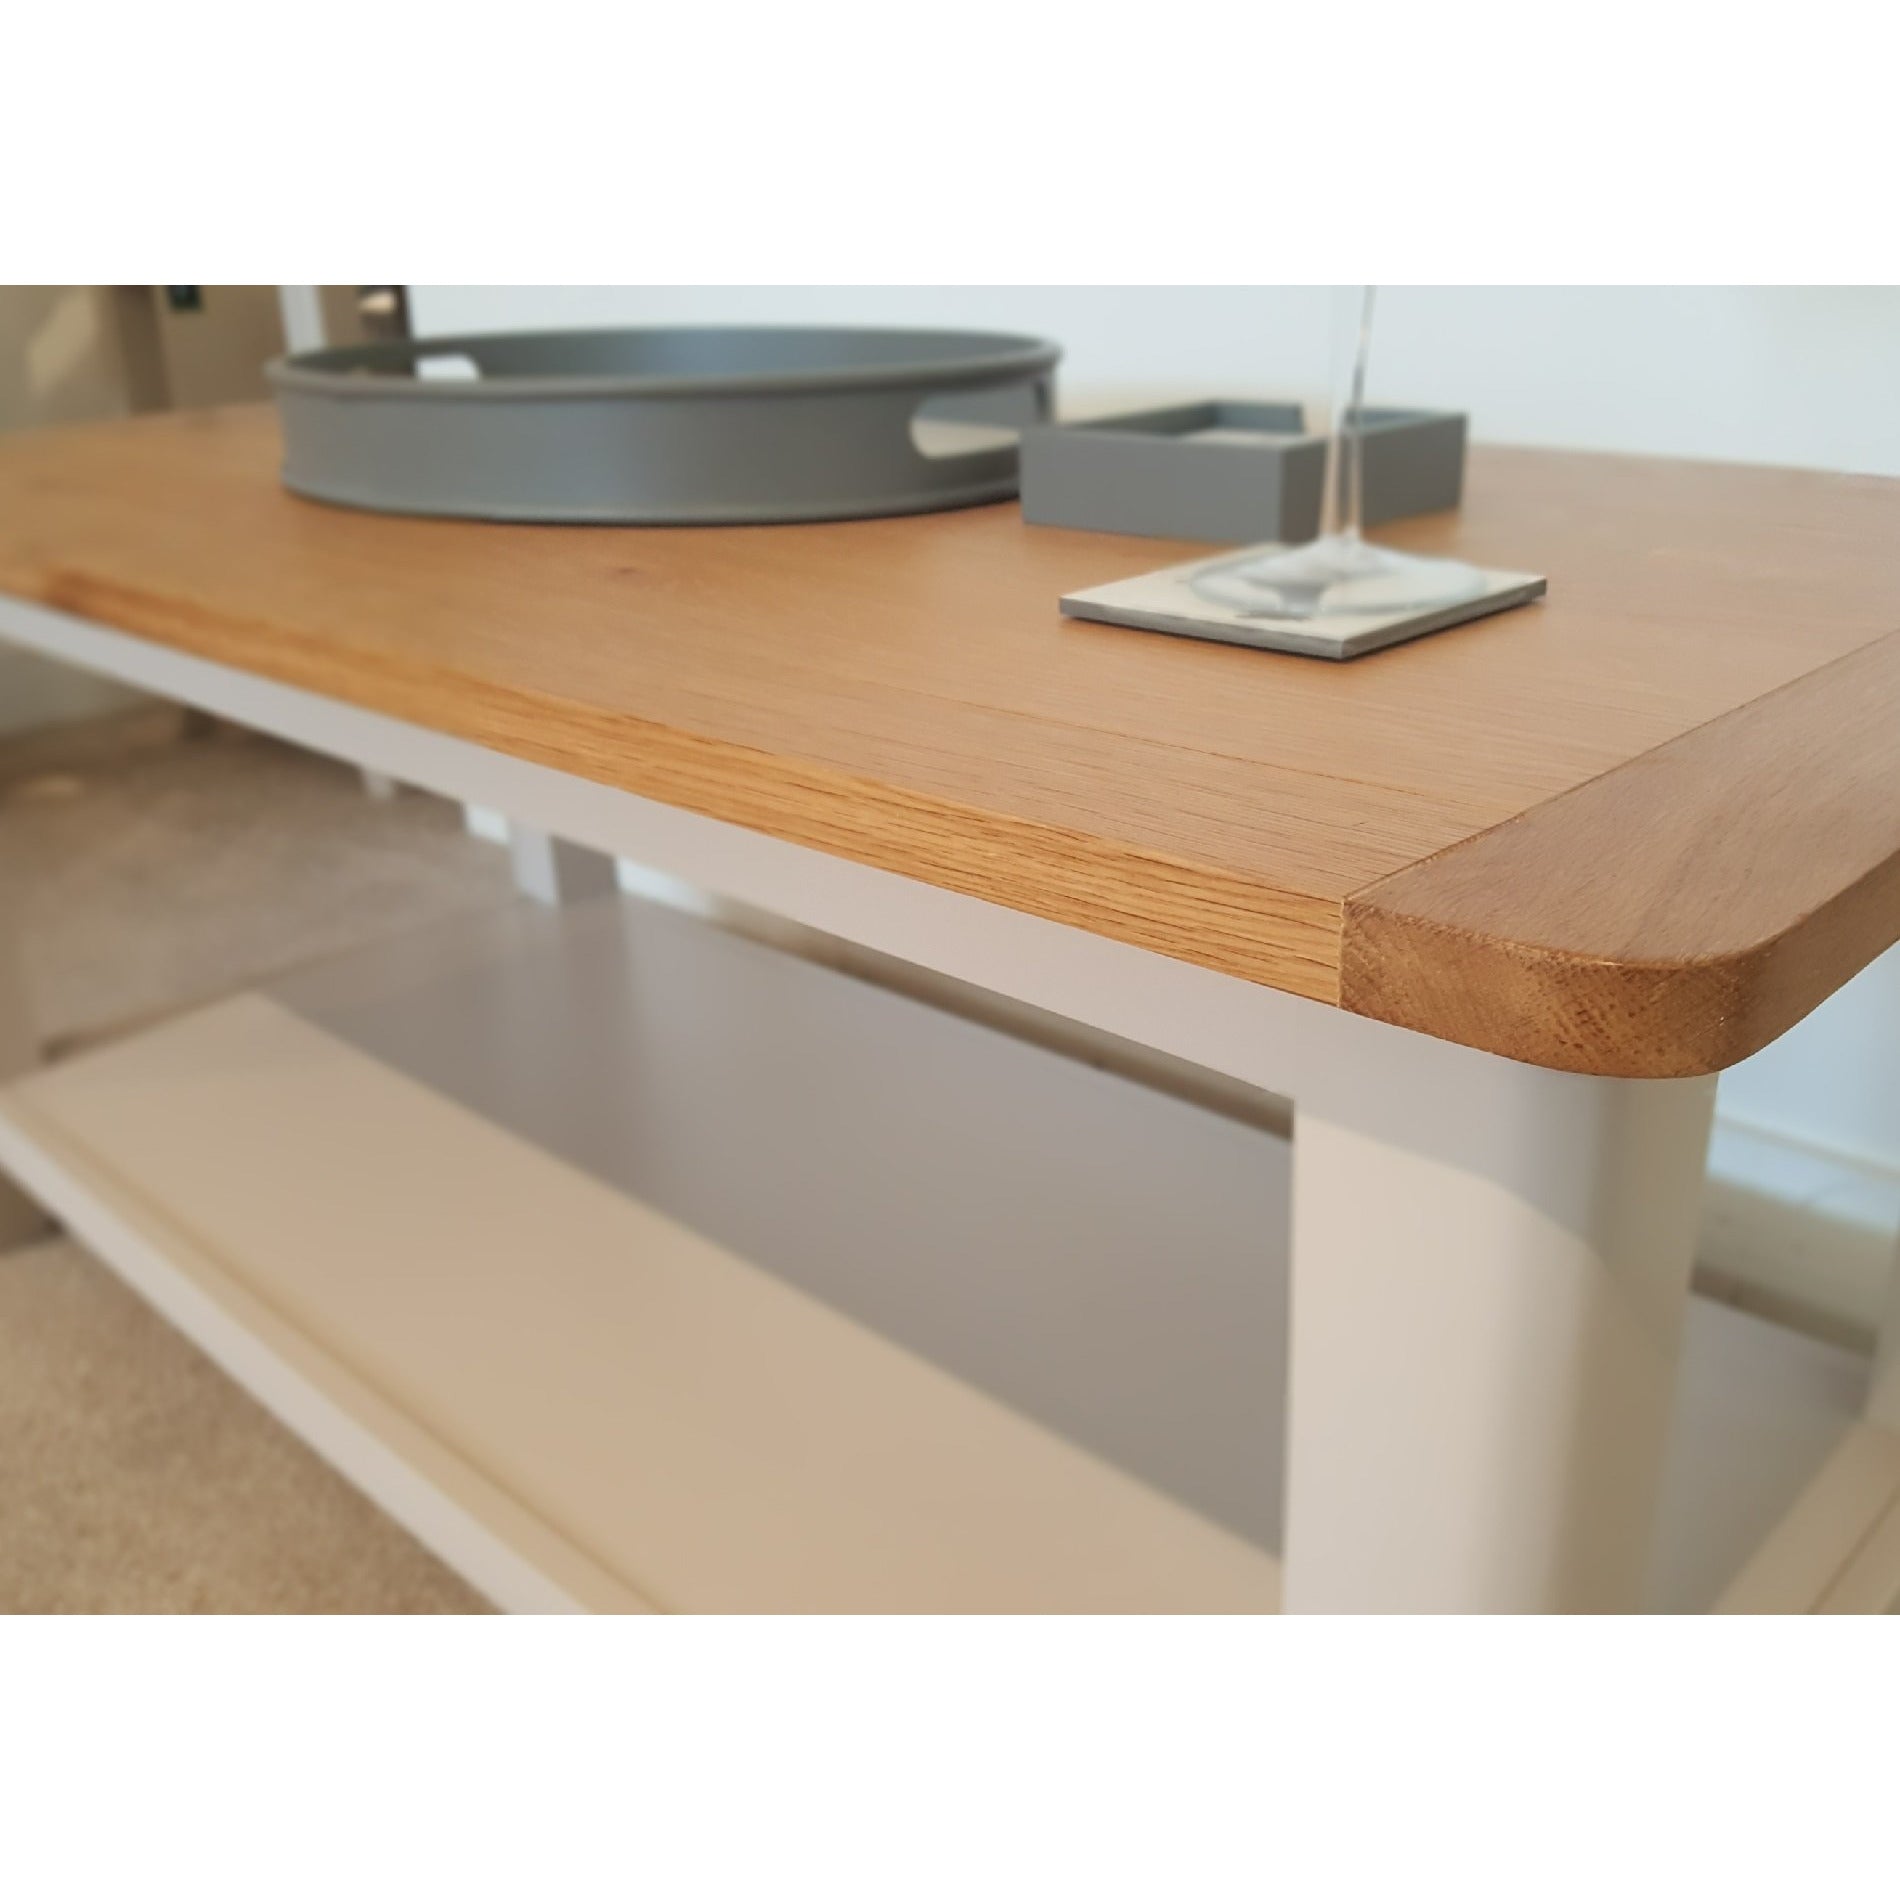 Pavilion Coffee Table from UpstairsDownstairs.ie